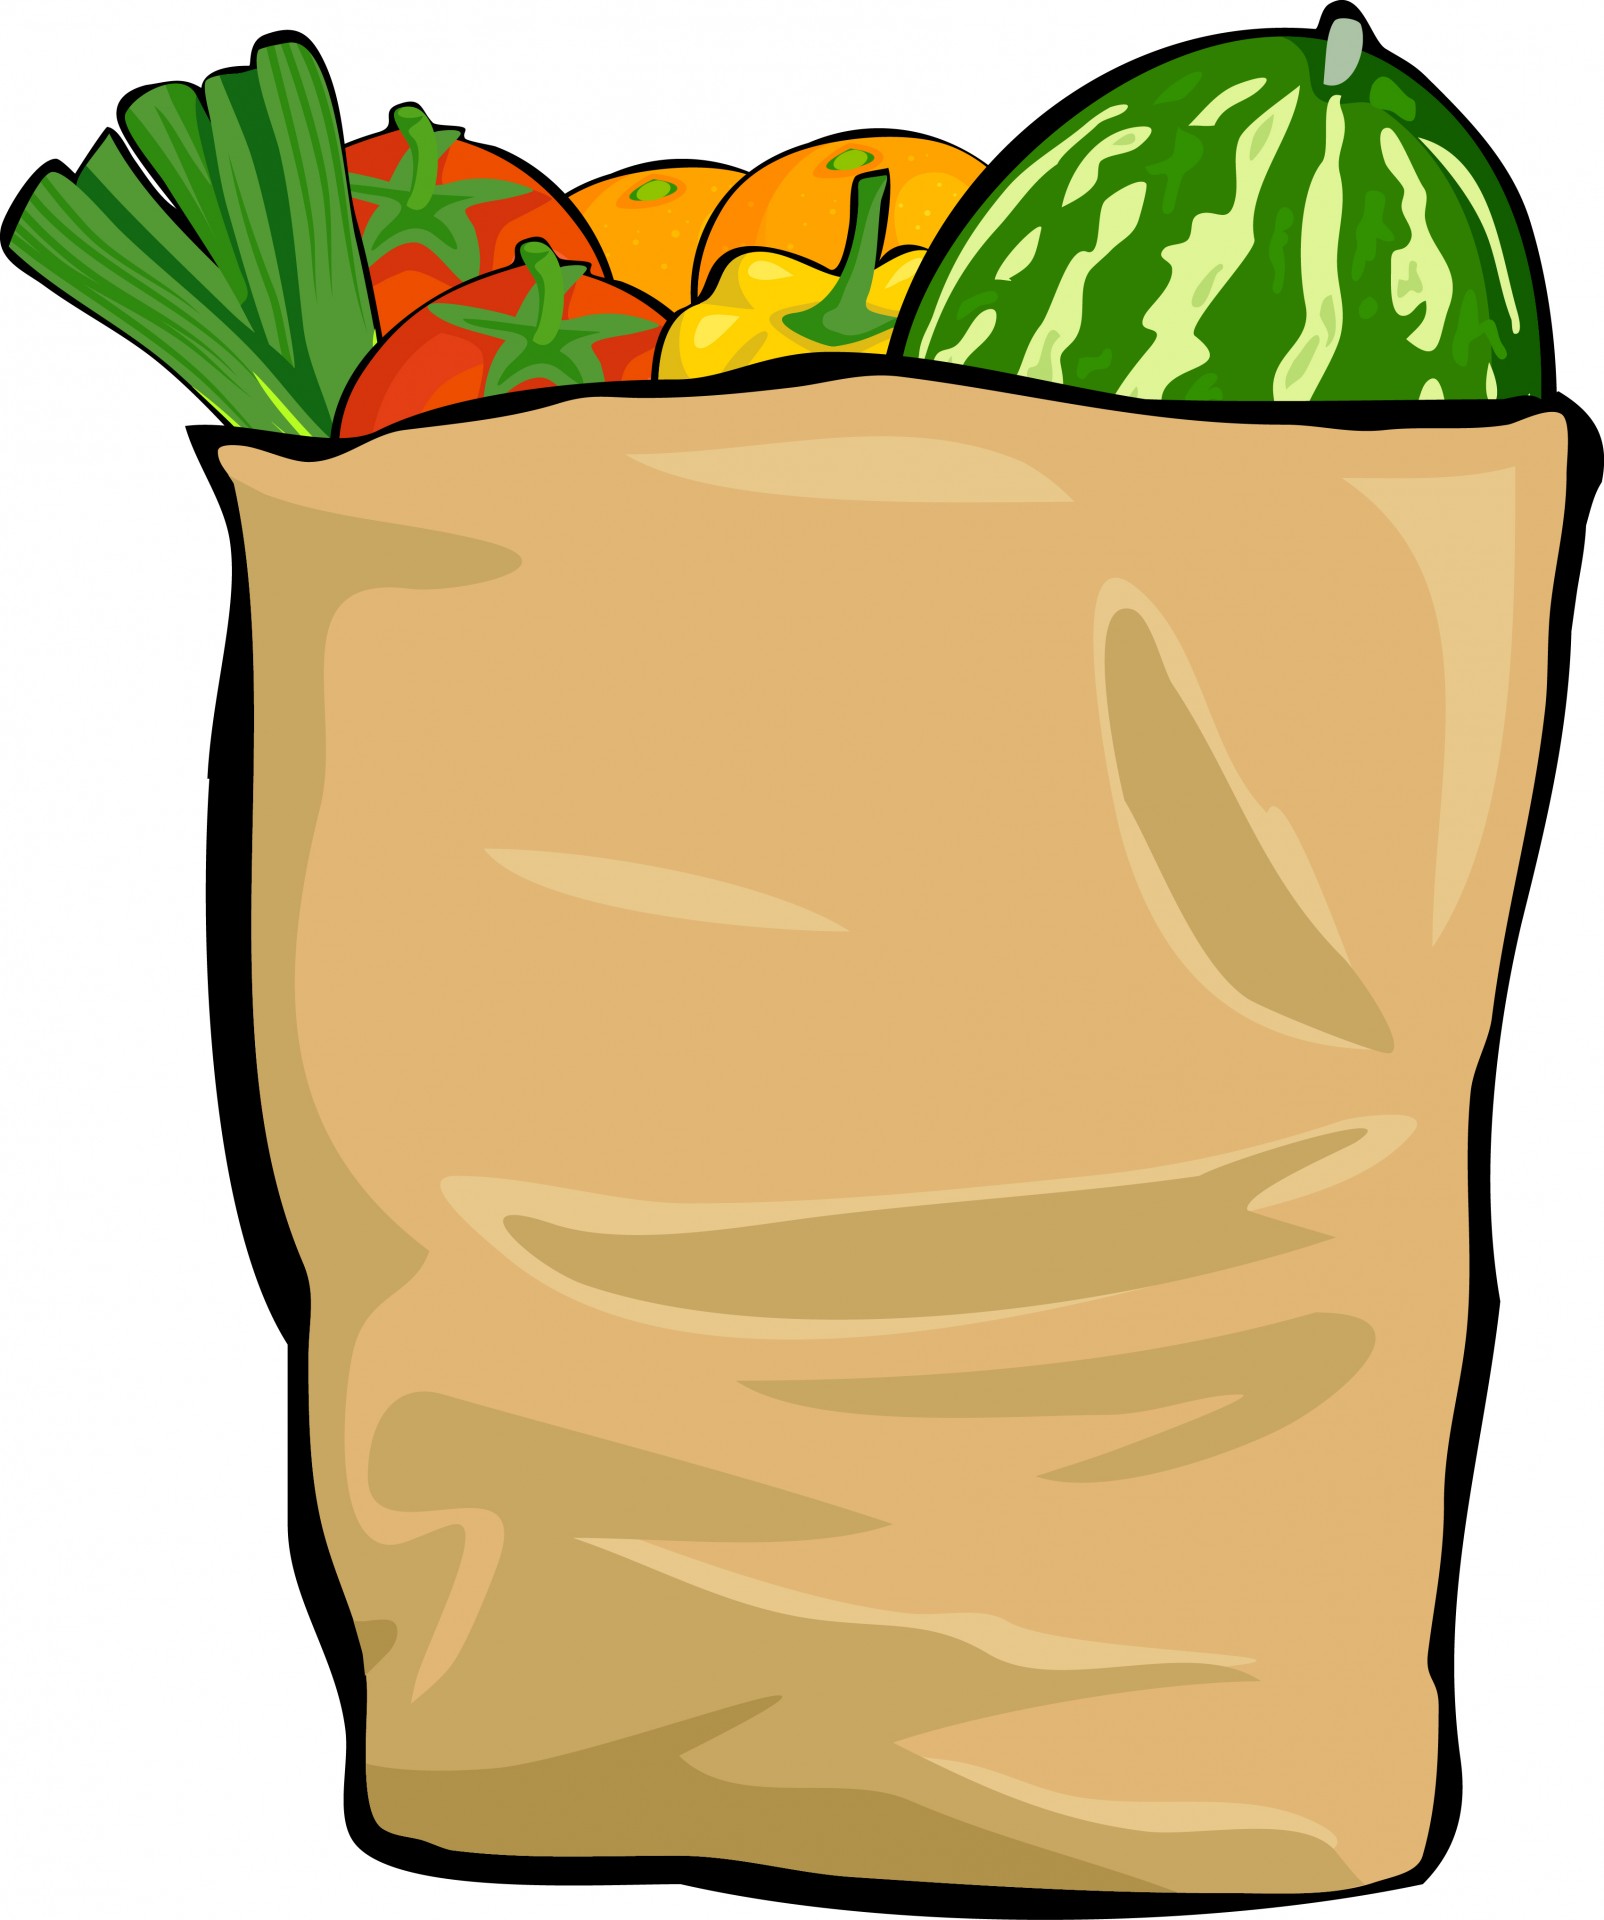 Groceries clipart free.